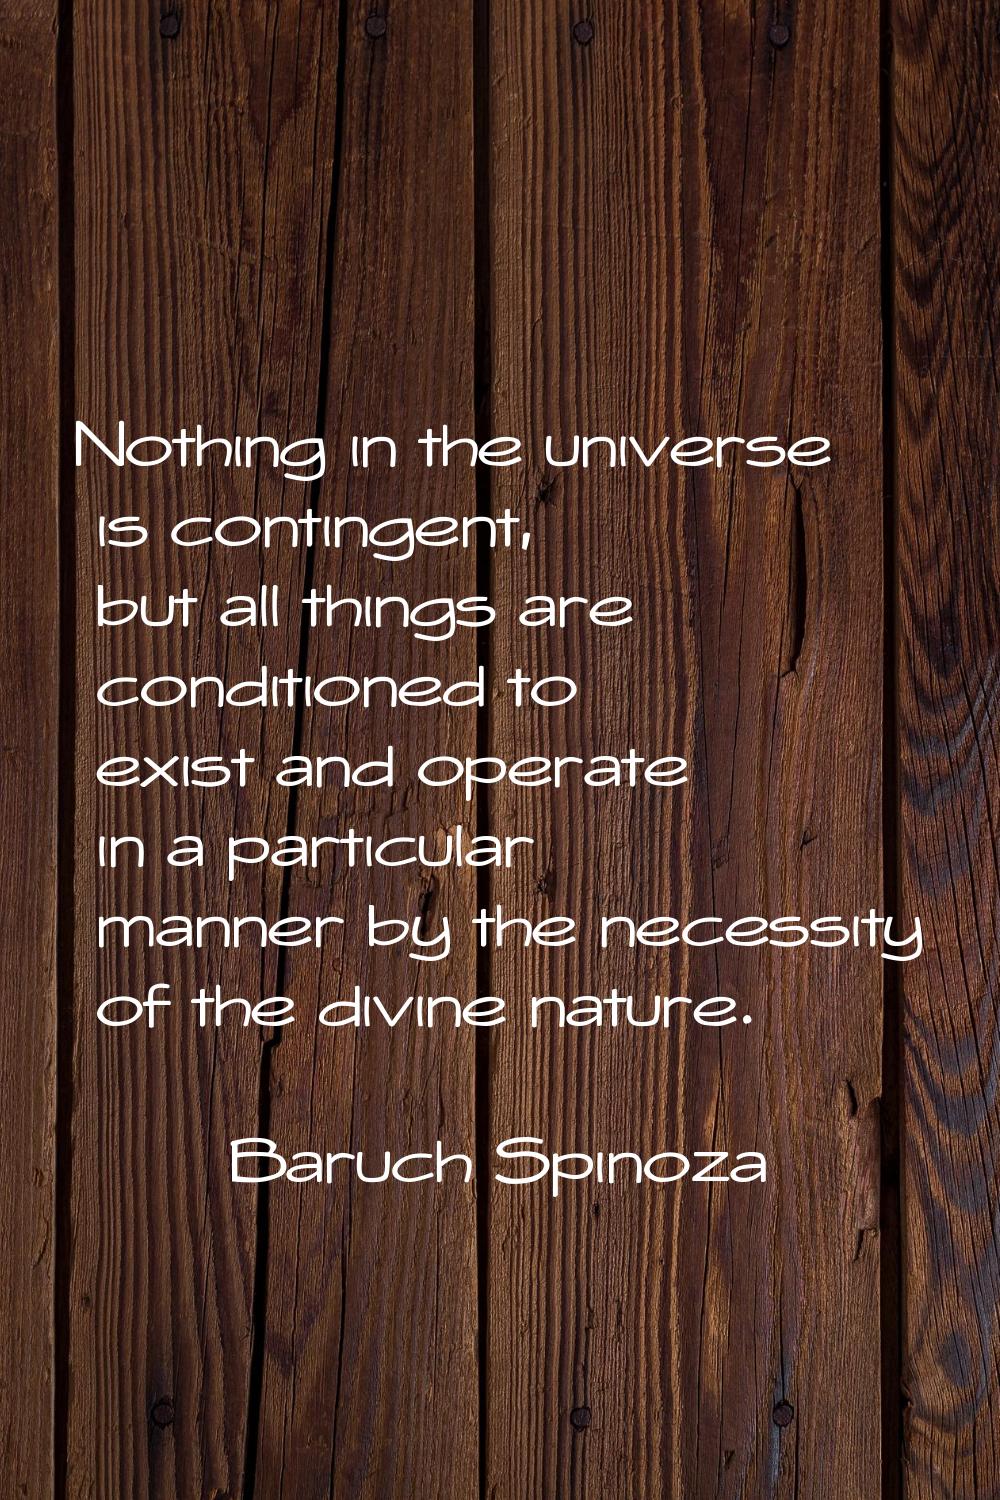 Nothing in the universe is contingent, but all things are conditioned to exist and operate in a par